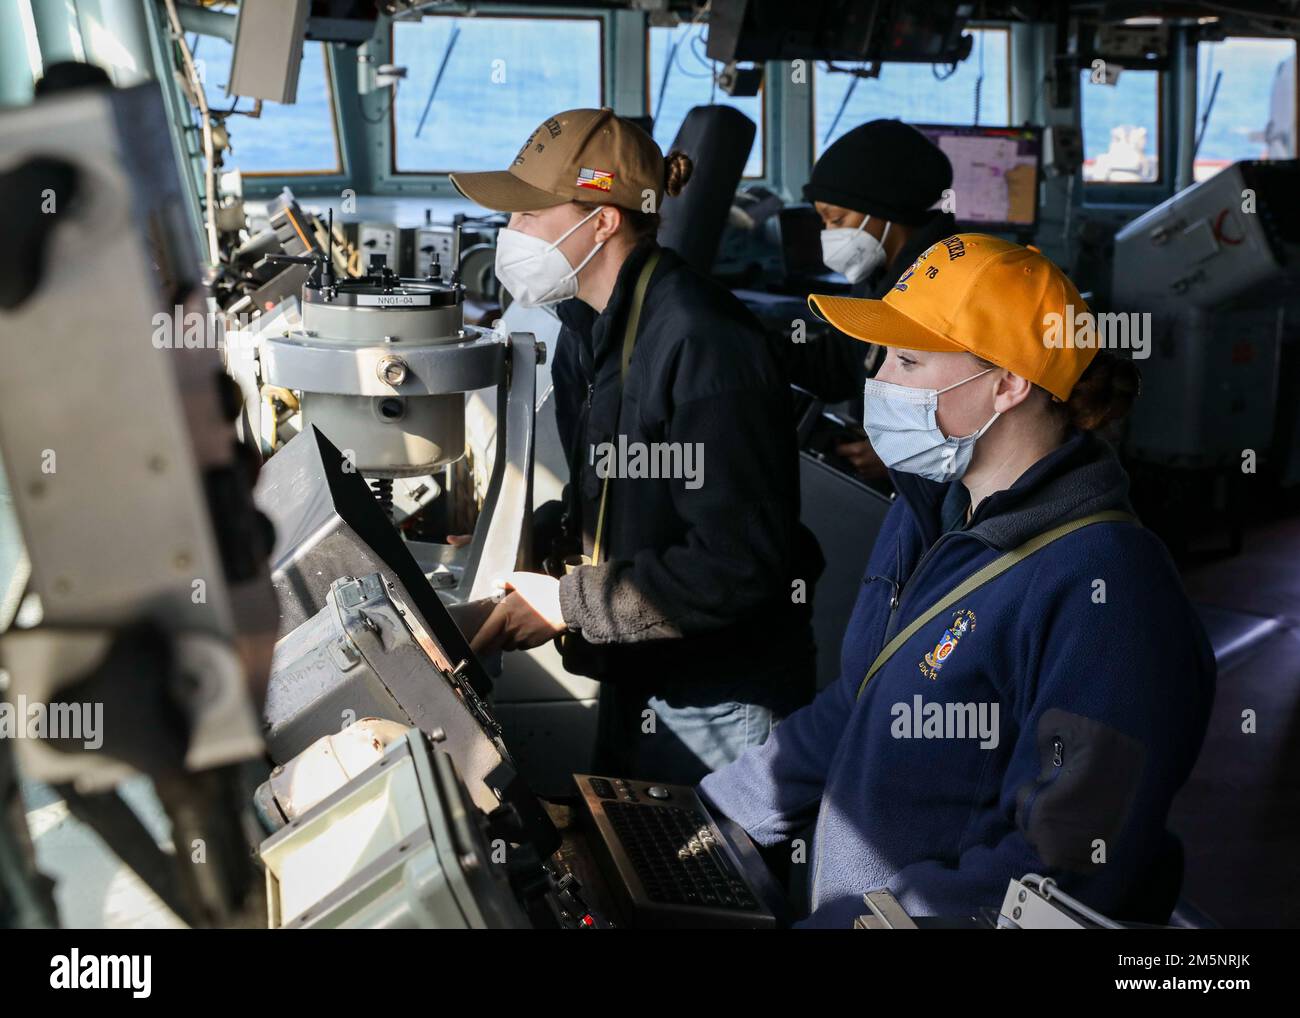 ATLANTIC OCEAN (Feb. 26, 2022) – Lt. j.g. Rebecca Ouellette, left, Ensign Cayla Hannibal, center, and Lt. j.g. Brinn Hefron man the bridge while underway aboard the Arleigh Burke-class guided-missile destroyer USS Porter (DDG 78), Feb. 26, 2022. Porter, forward-deployed to Rota, Spain, is currently underway in the U.S. Sixth Fleet area of operations in support of regional allies and partners and U.S. national security interests in Europe and Africa. Stock Photo